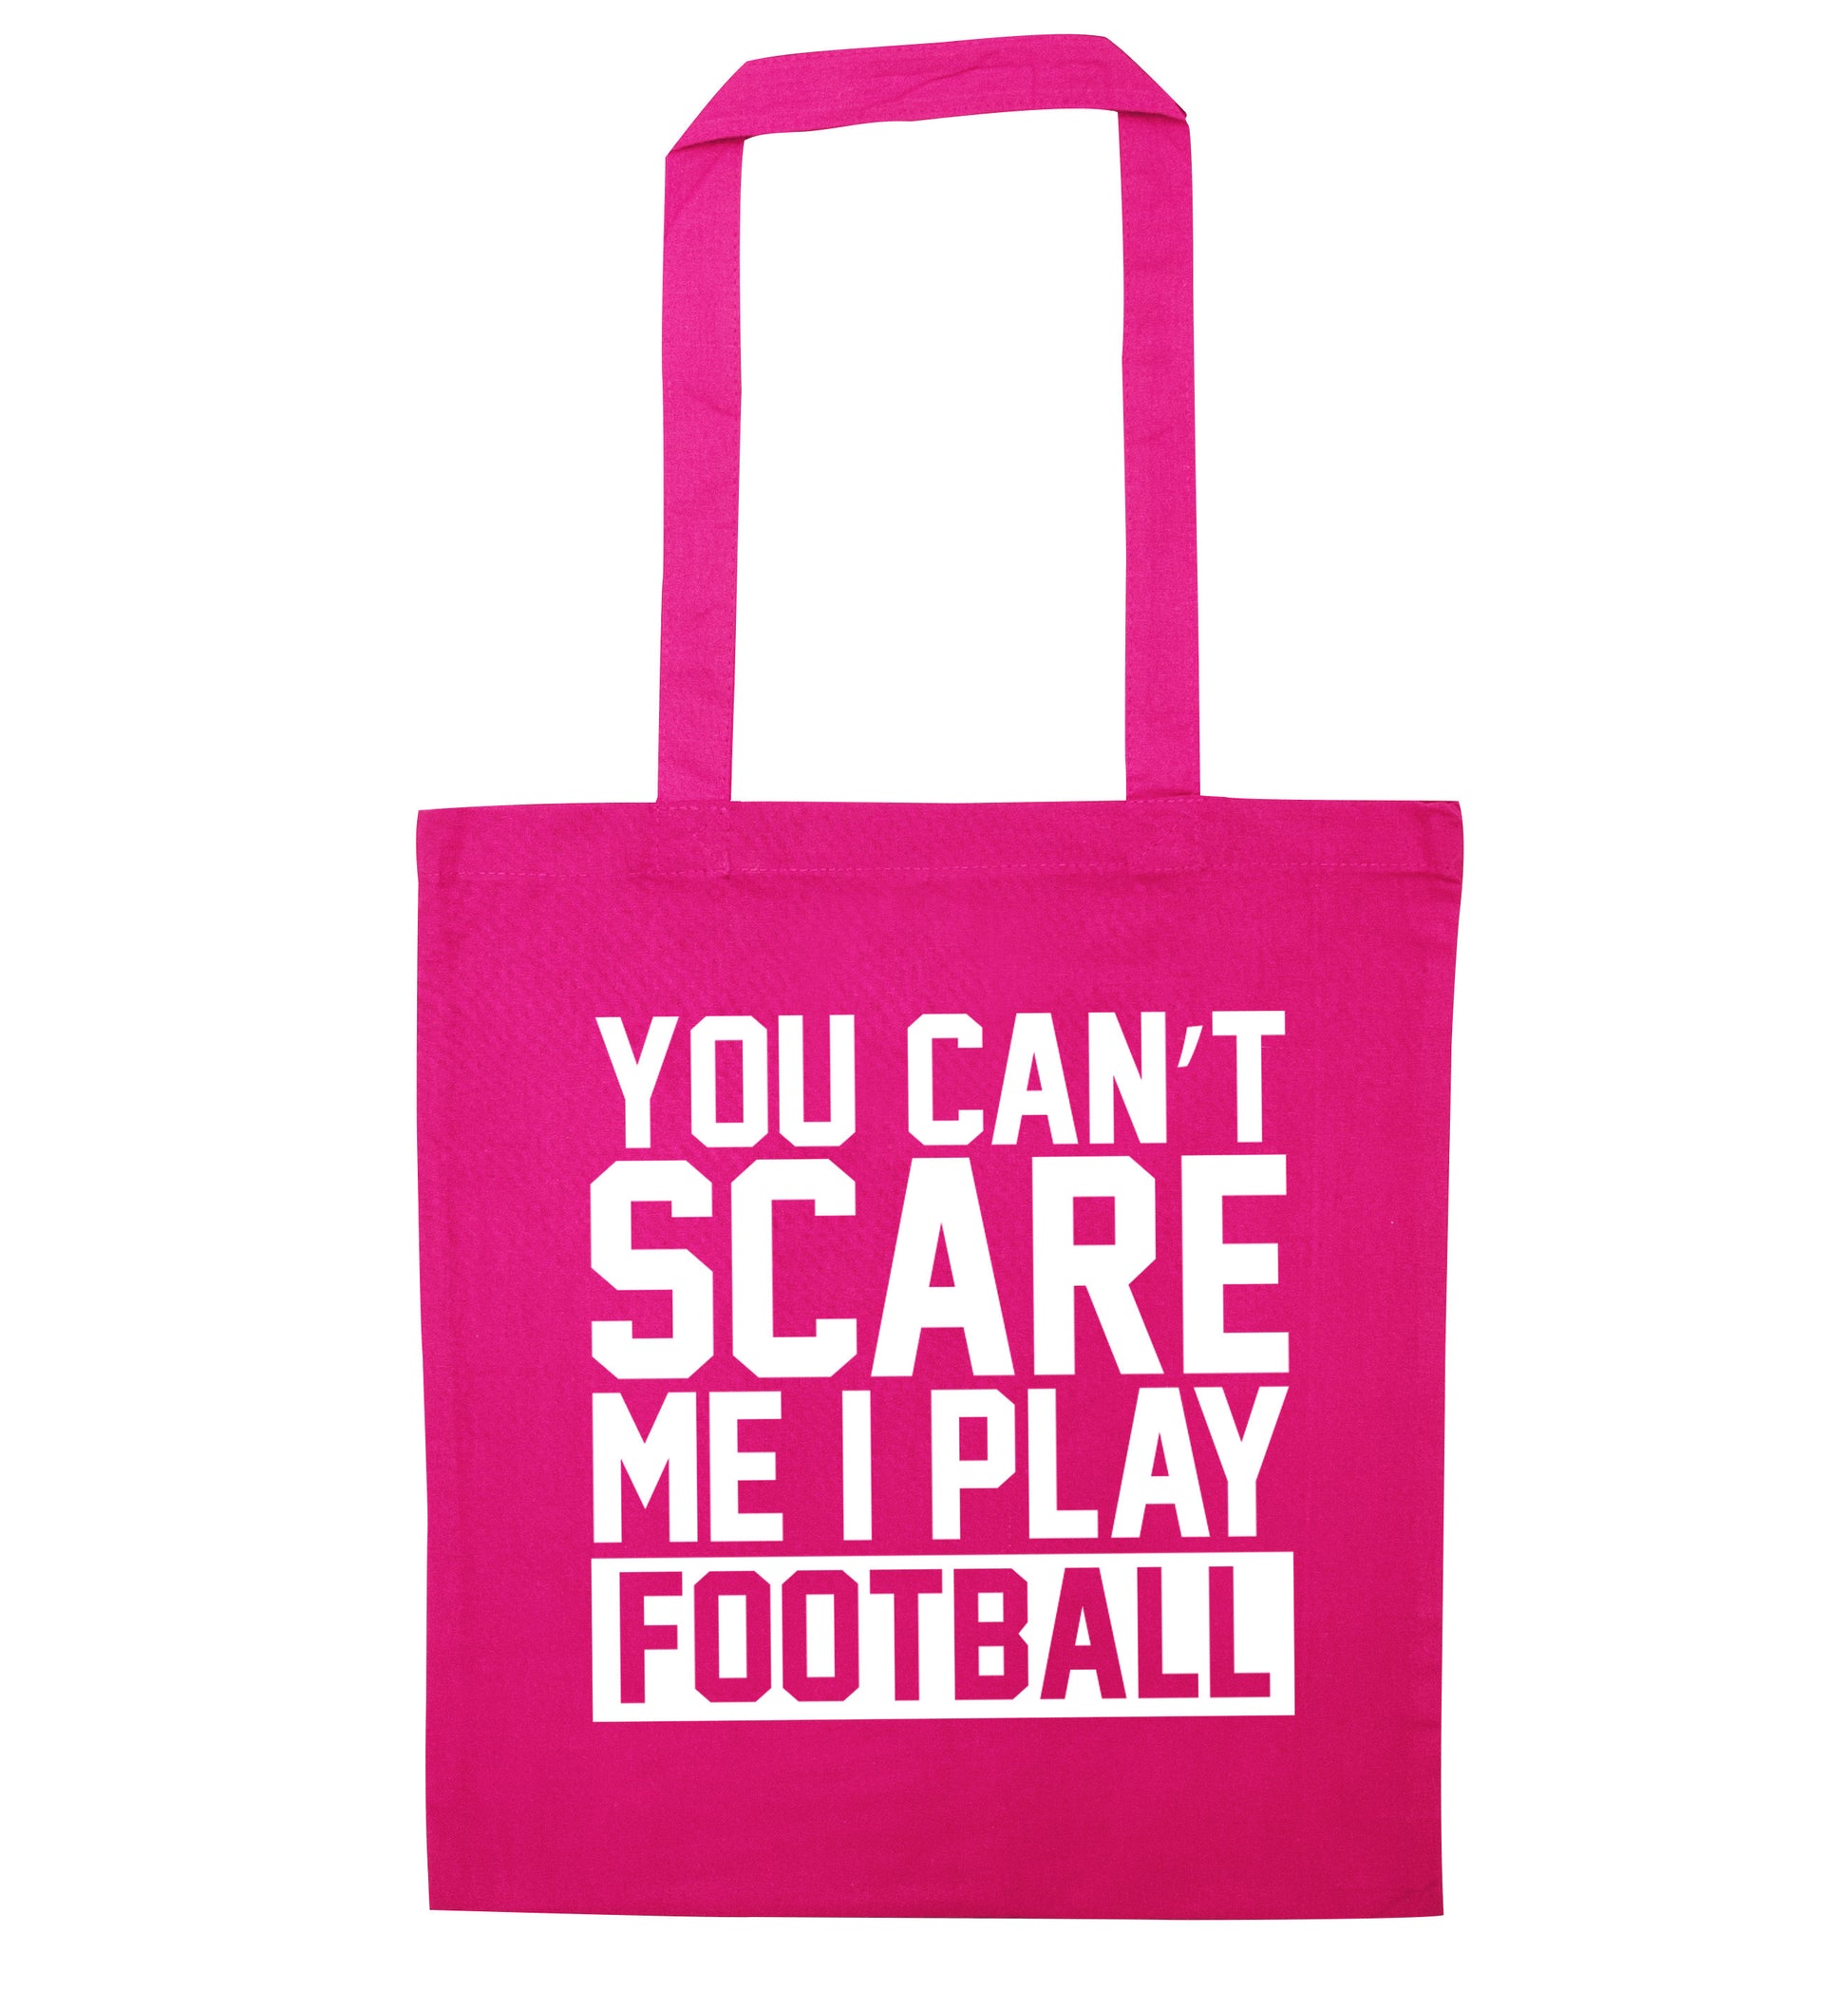 You can't scare me I play football pink tote bag